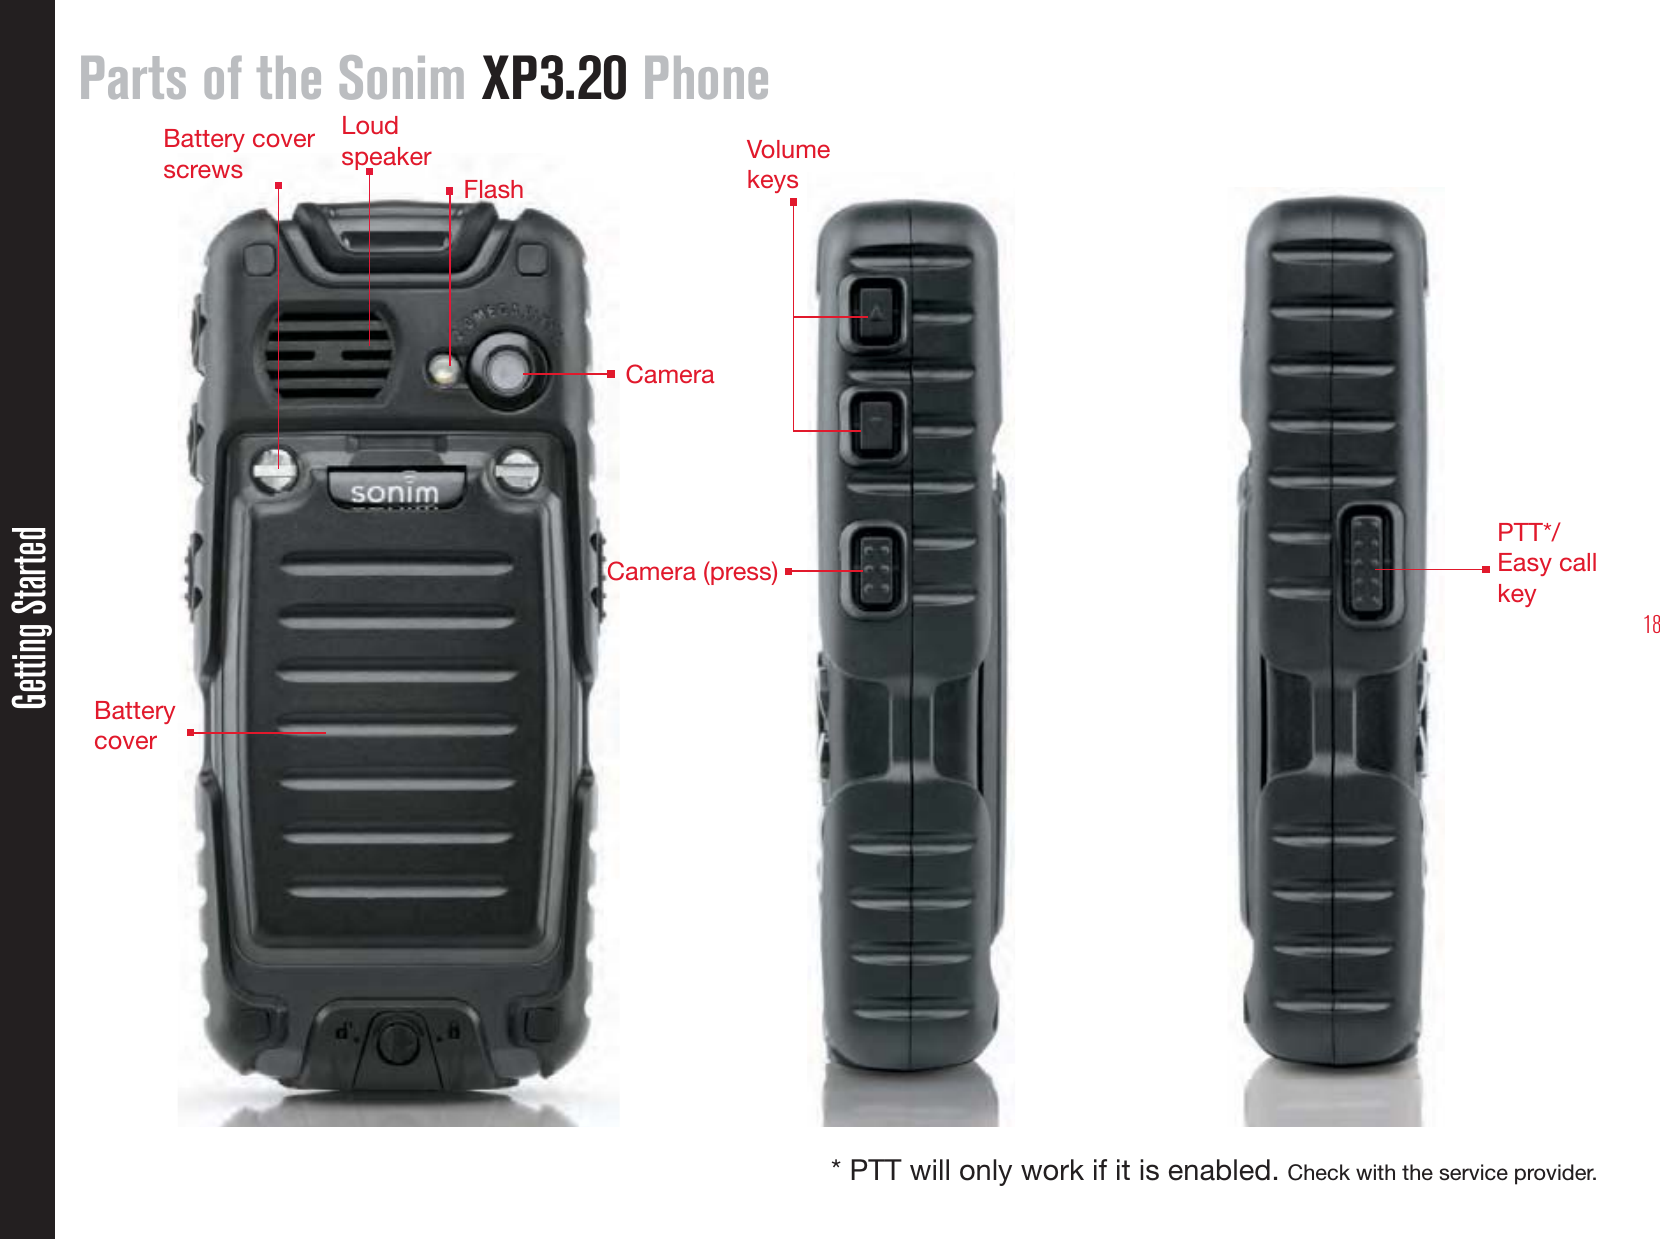 18Getting StartedParts of the Sonim XP3.20 PhoneVolume keysPTT*/Easy call keyBattery coverBattery cover screwsLoud speakerCameraFlashCamera (press)* PTT will only work if it is enabled. Check with the service provider.